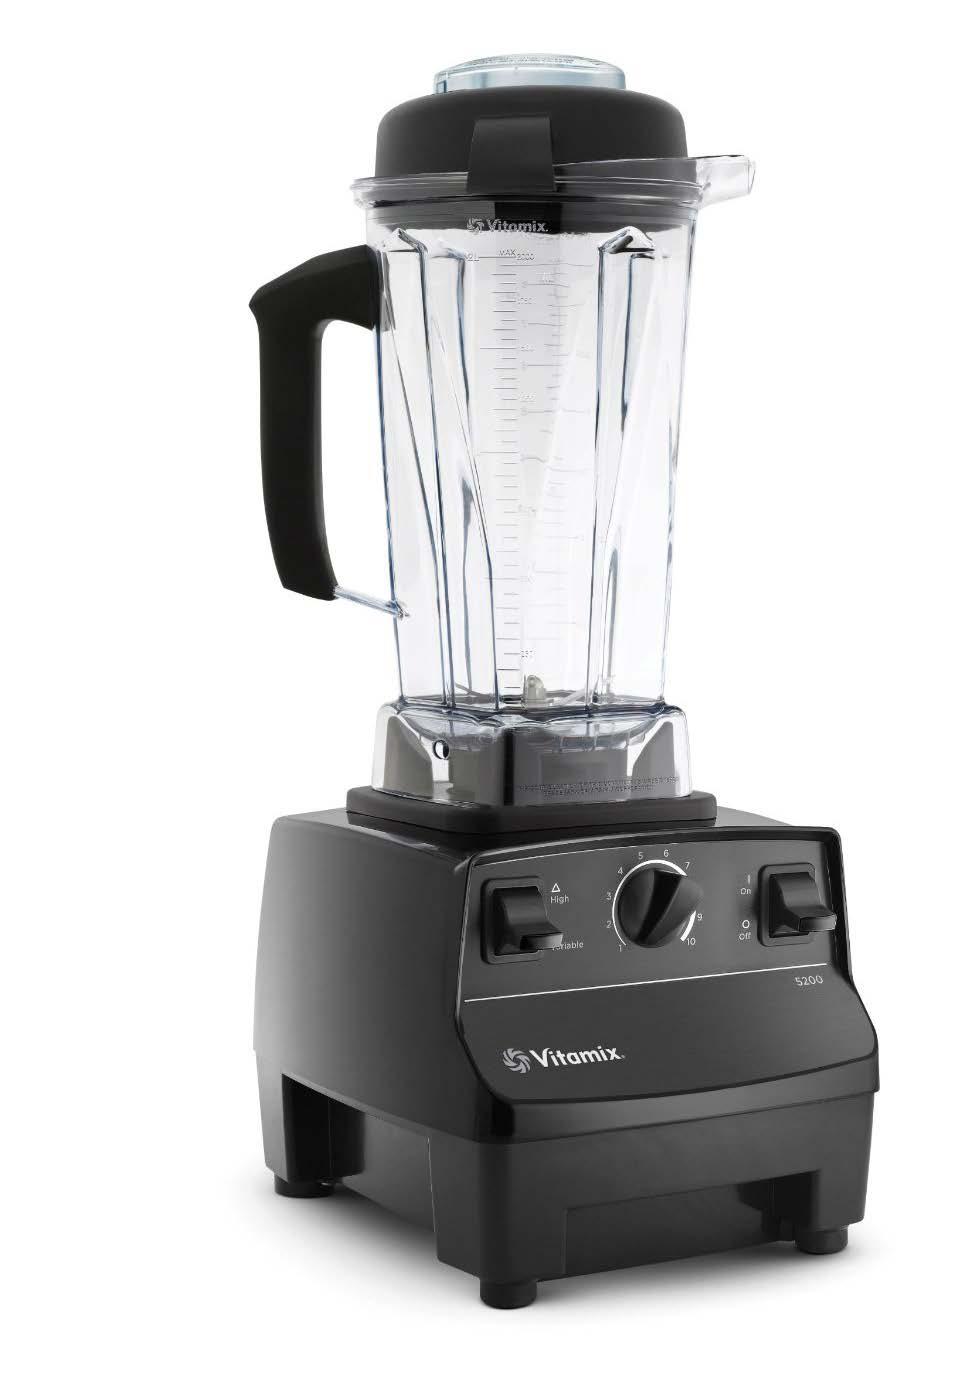 The most important consideration in choosing a blender is a powerful motor (high RPM) so that it can blend ice and other tougher ingredients without blinking.